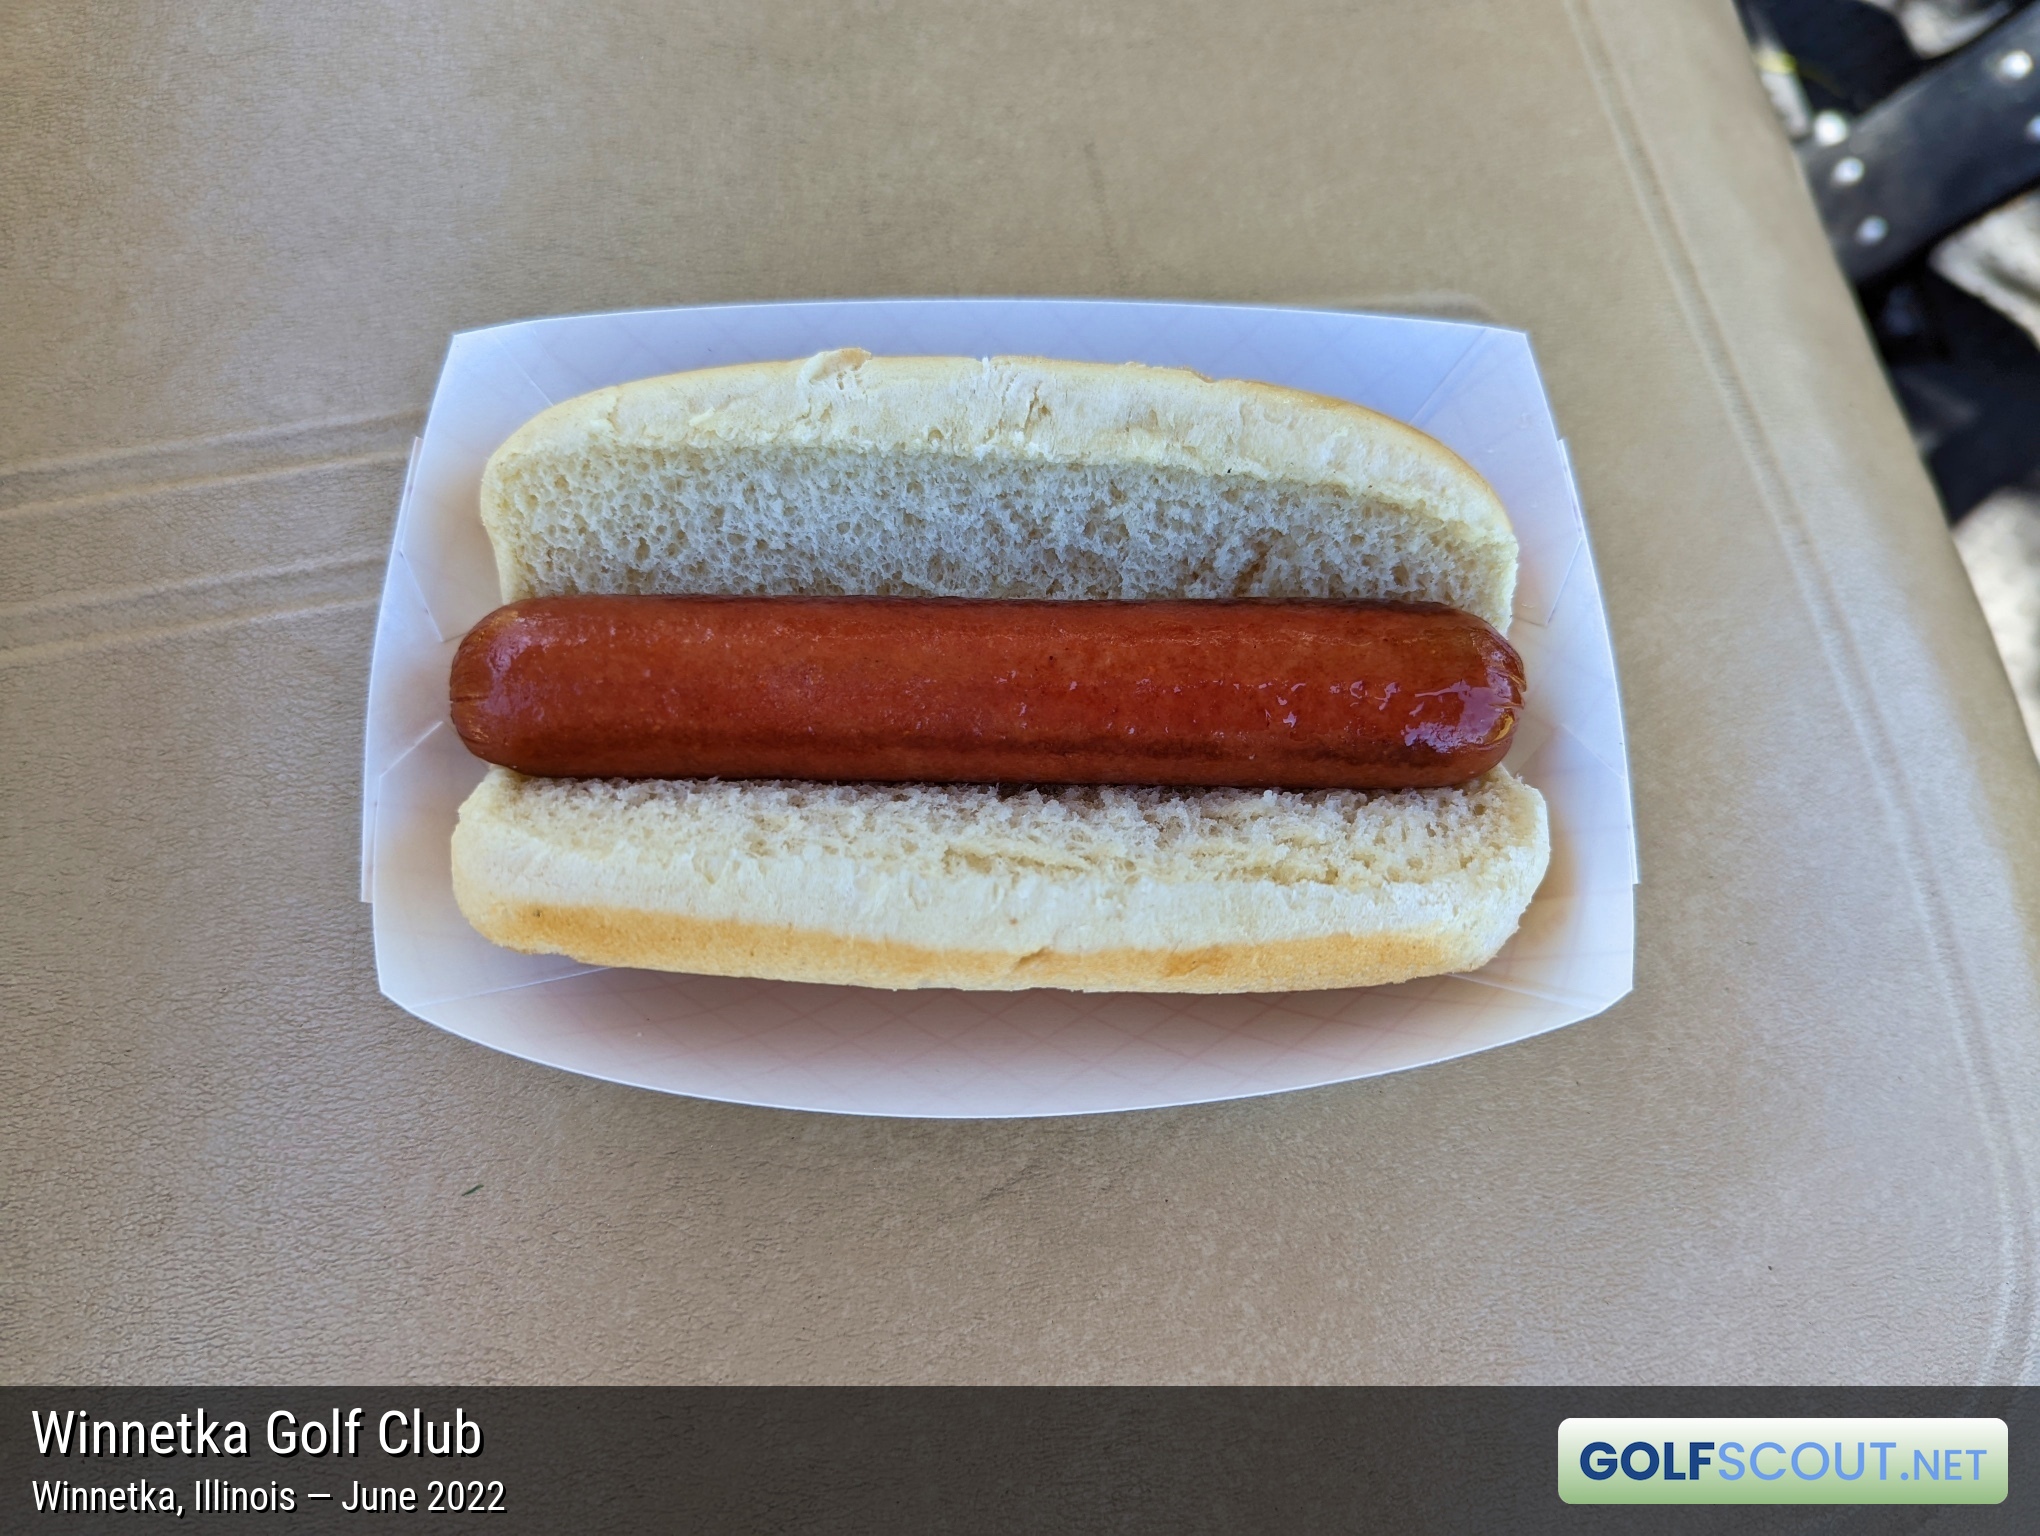 Photo of the food and dining at Winnetka Golf Club in Winnetka, Illinois. Photo of the hot dog at Winnetka Golf Club in Winnetka, Illinois.